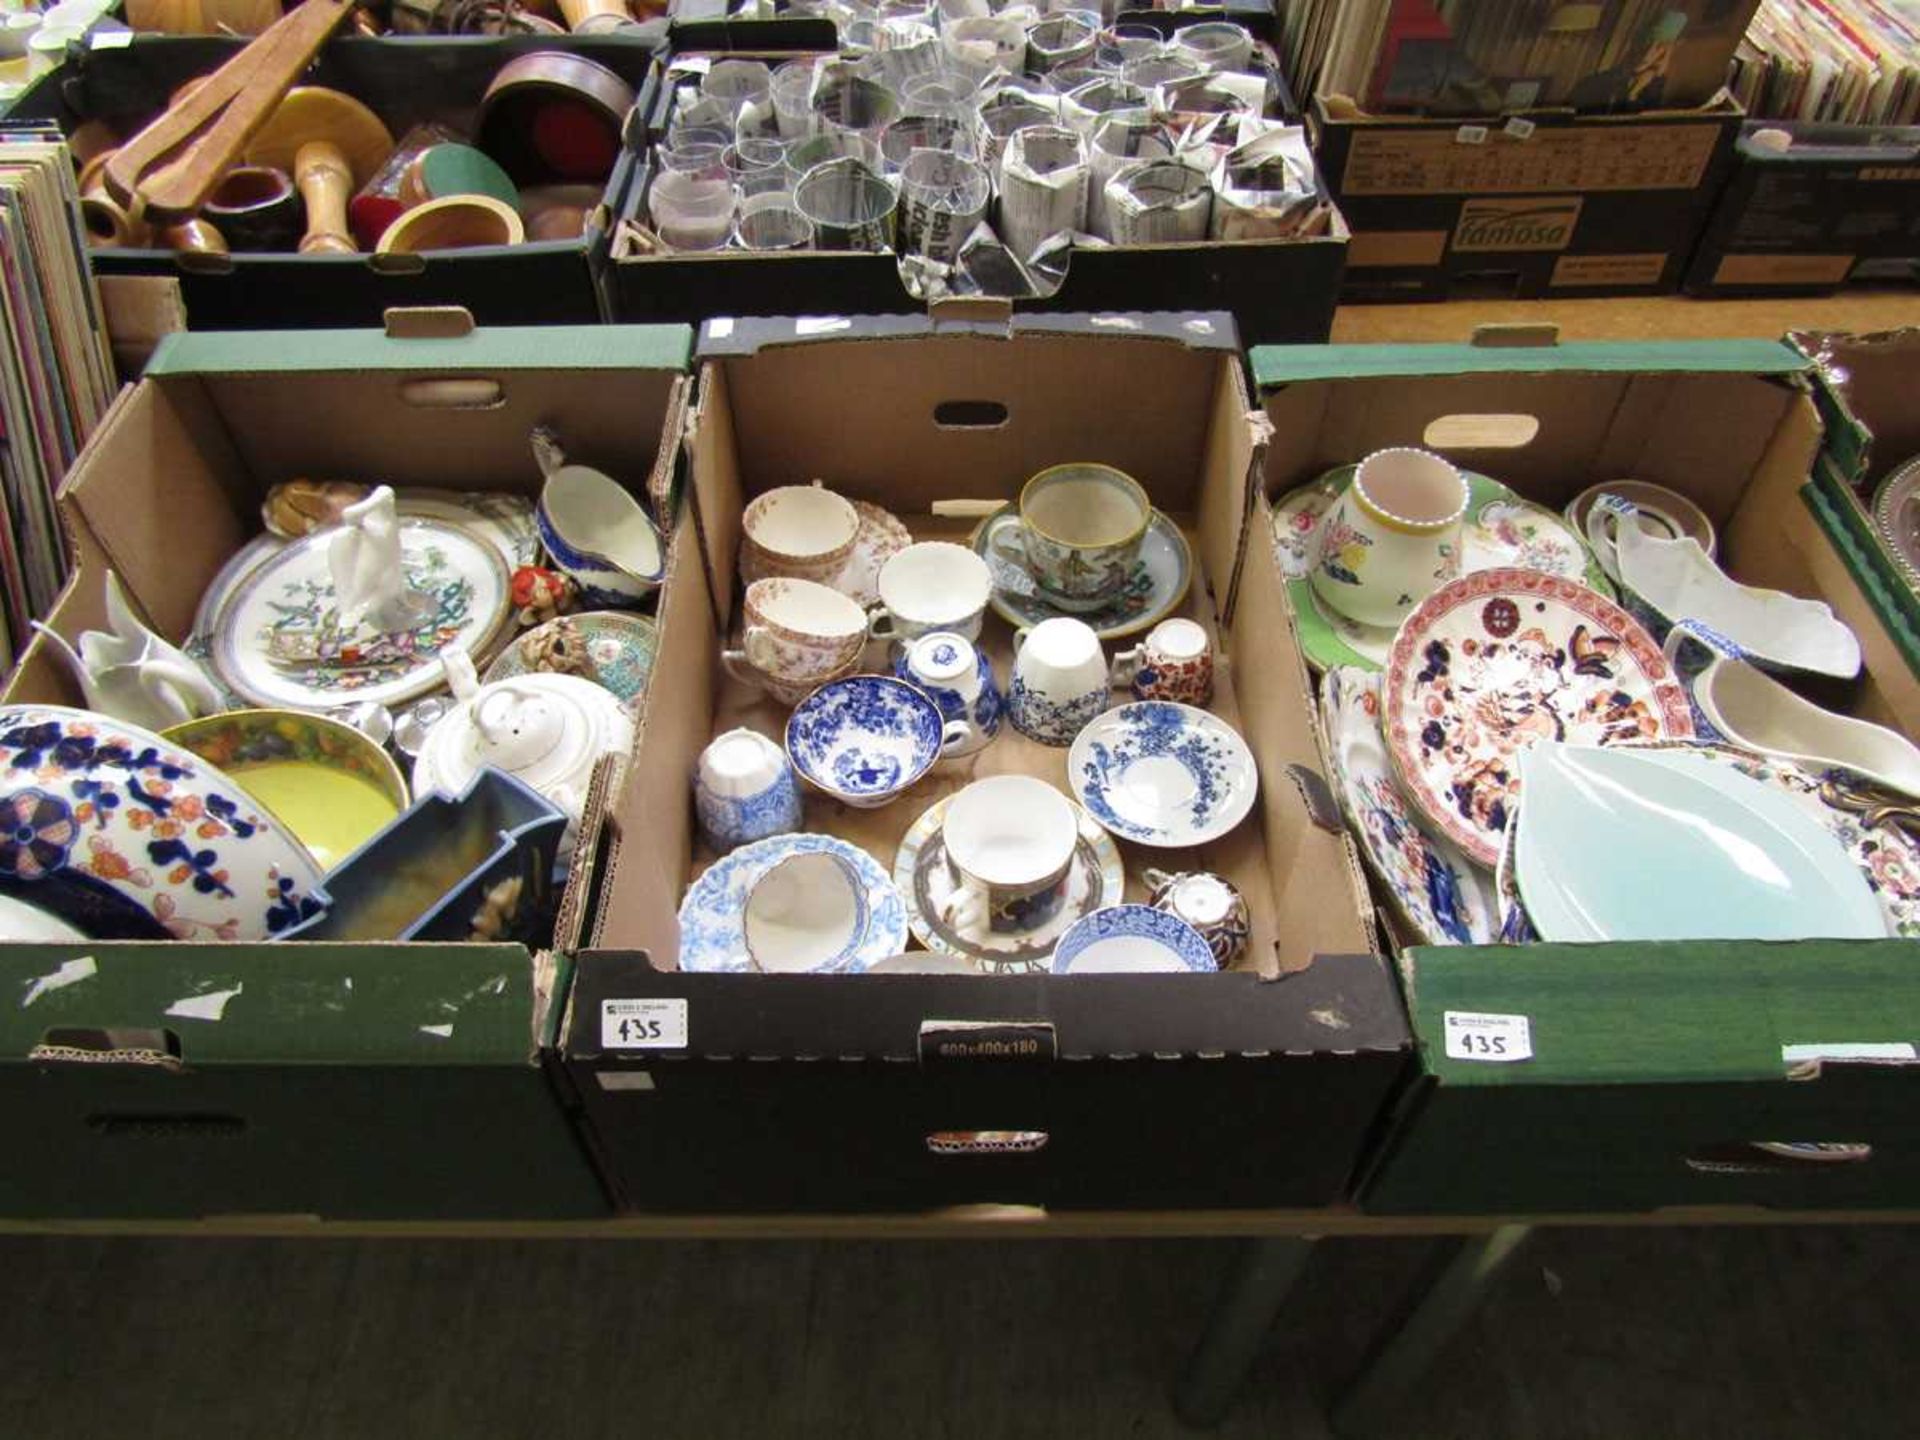 Three trays of ceramic ware to include bowls, cups, saucers, plates, Poole Pottery vase, etc